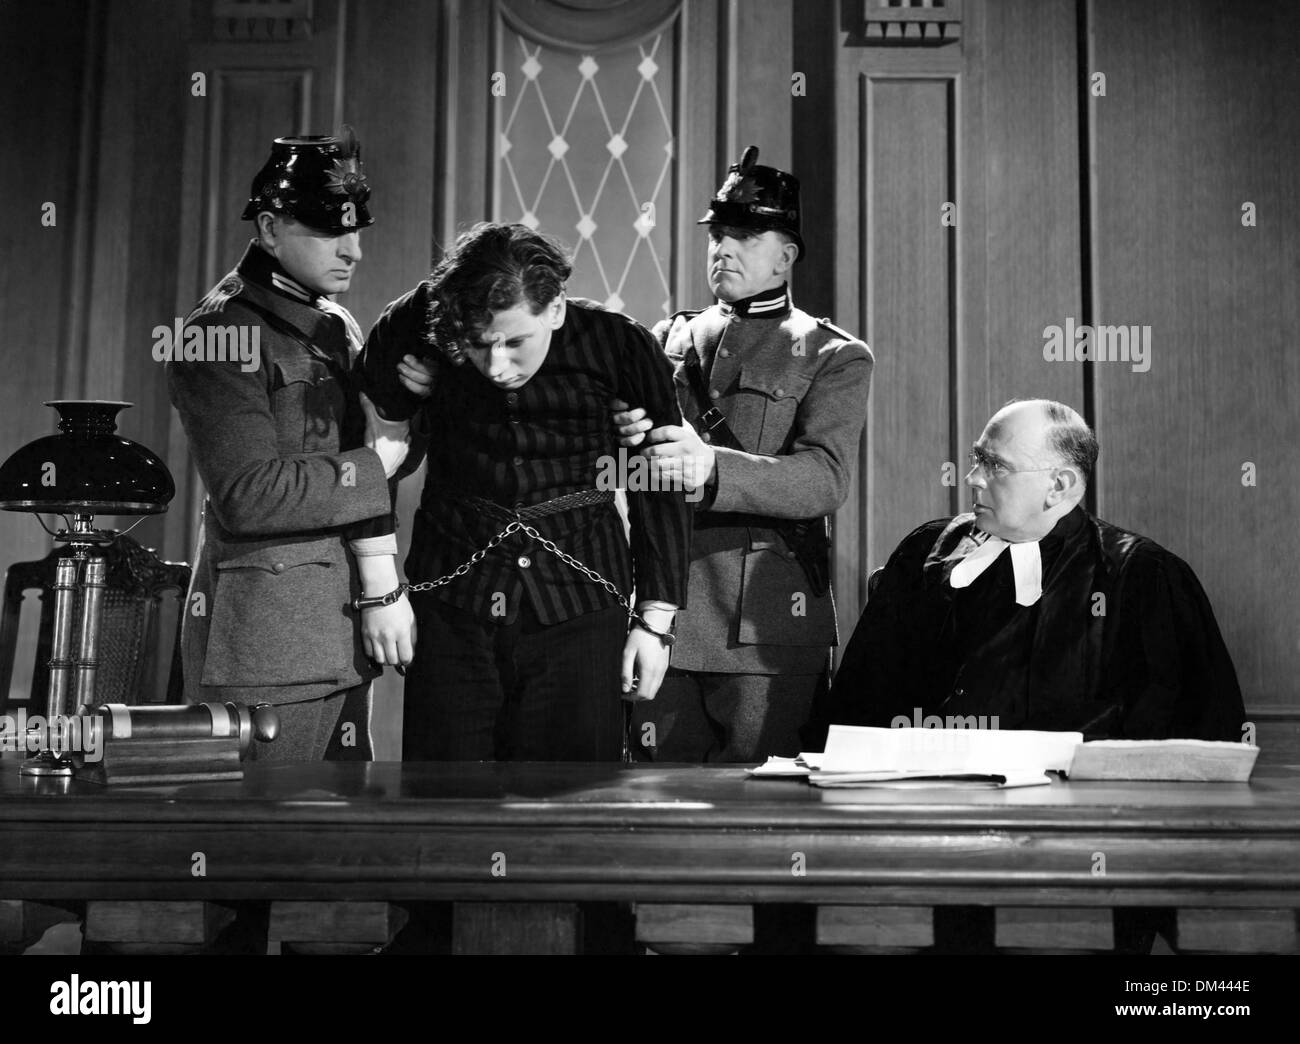 AFTER MEIN KAMPF? (1940) AFTER MEIN KAMPF? THE STORY OF ADOLPH HITLER (ALT) MEIN KAMPF - MY CRIMES (ALT) PETER USTINOV NORMAN Stock Photo